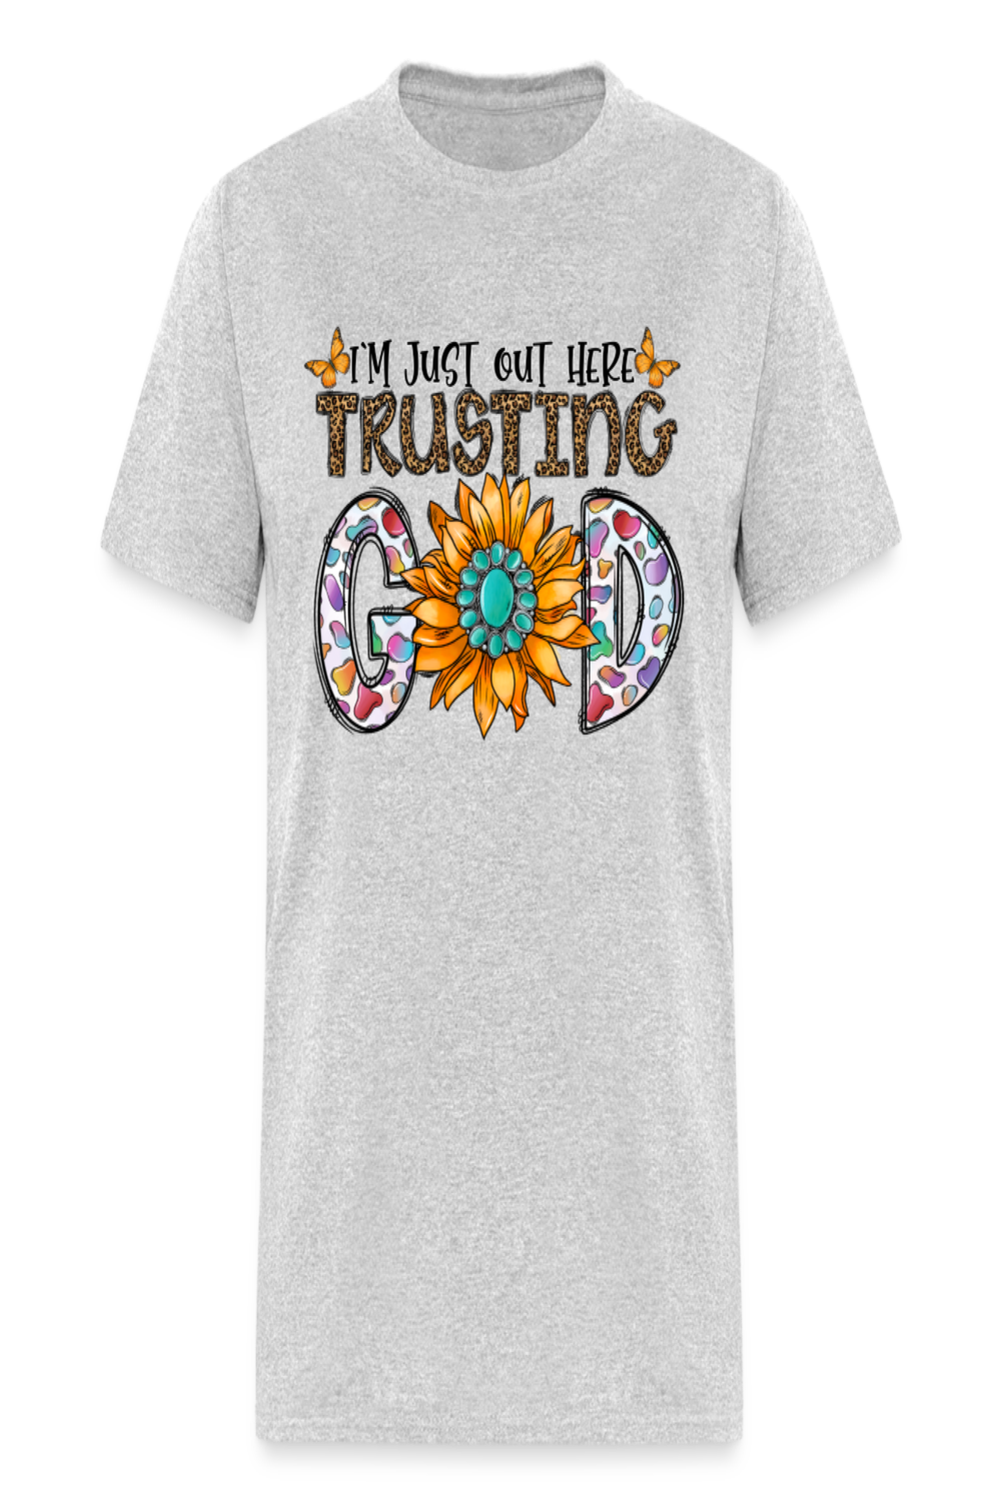 Women I'm Just Out Here Trusting God Short Sleeve T-Shirt - heather gray